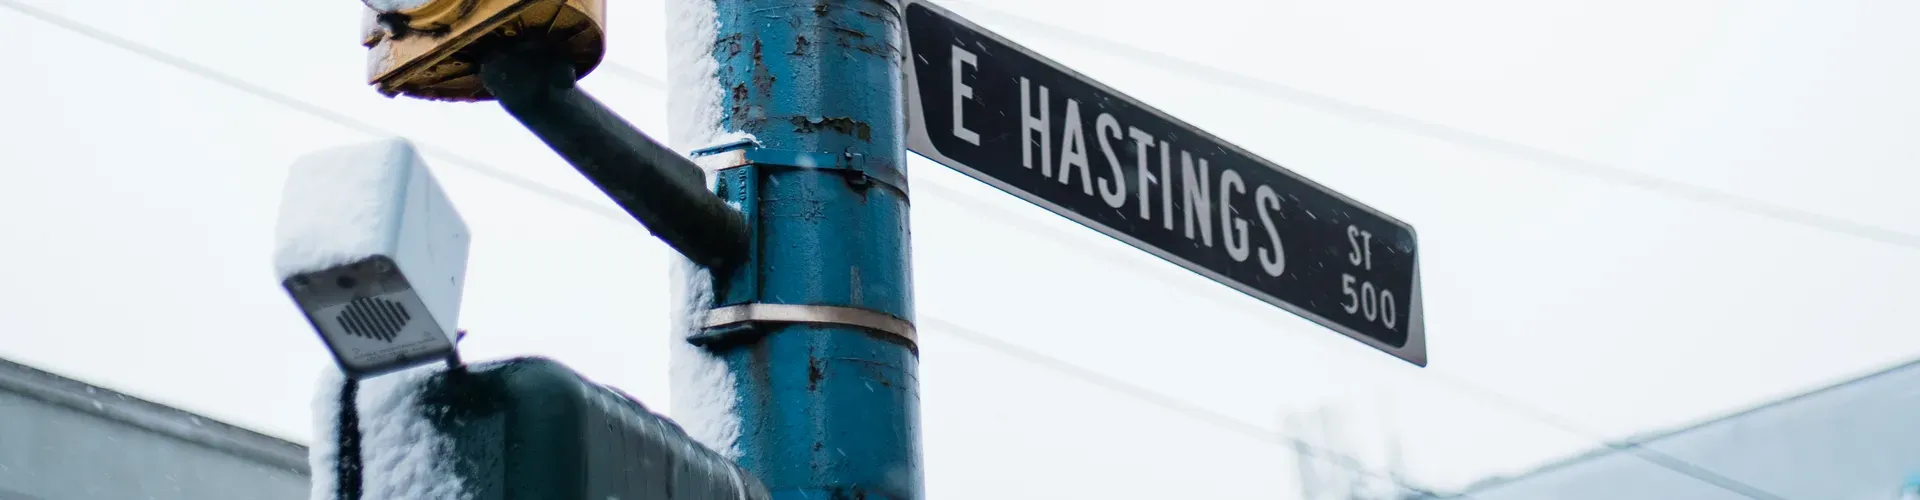 East Hastings Street Sign and Traffic Light